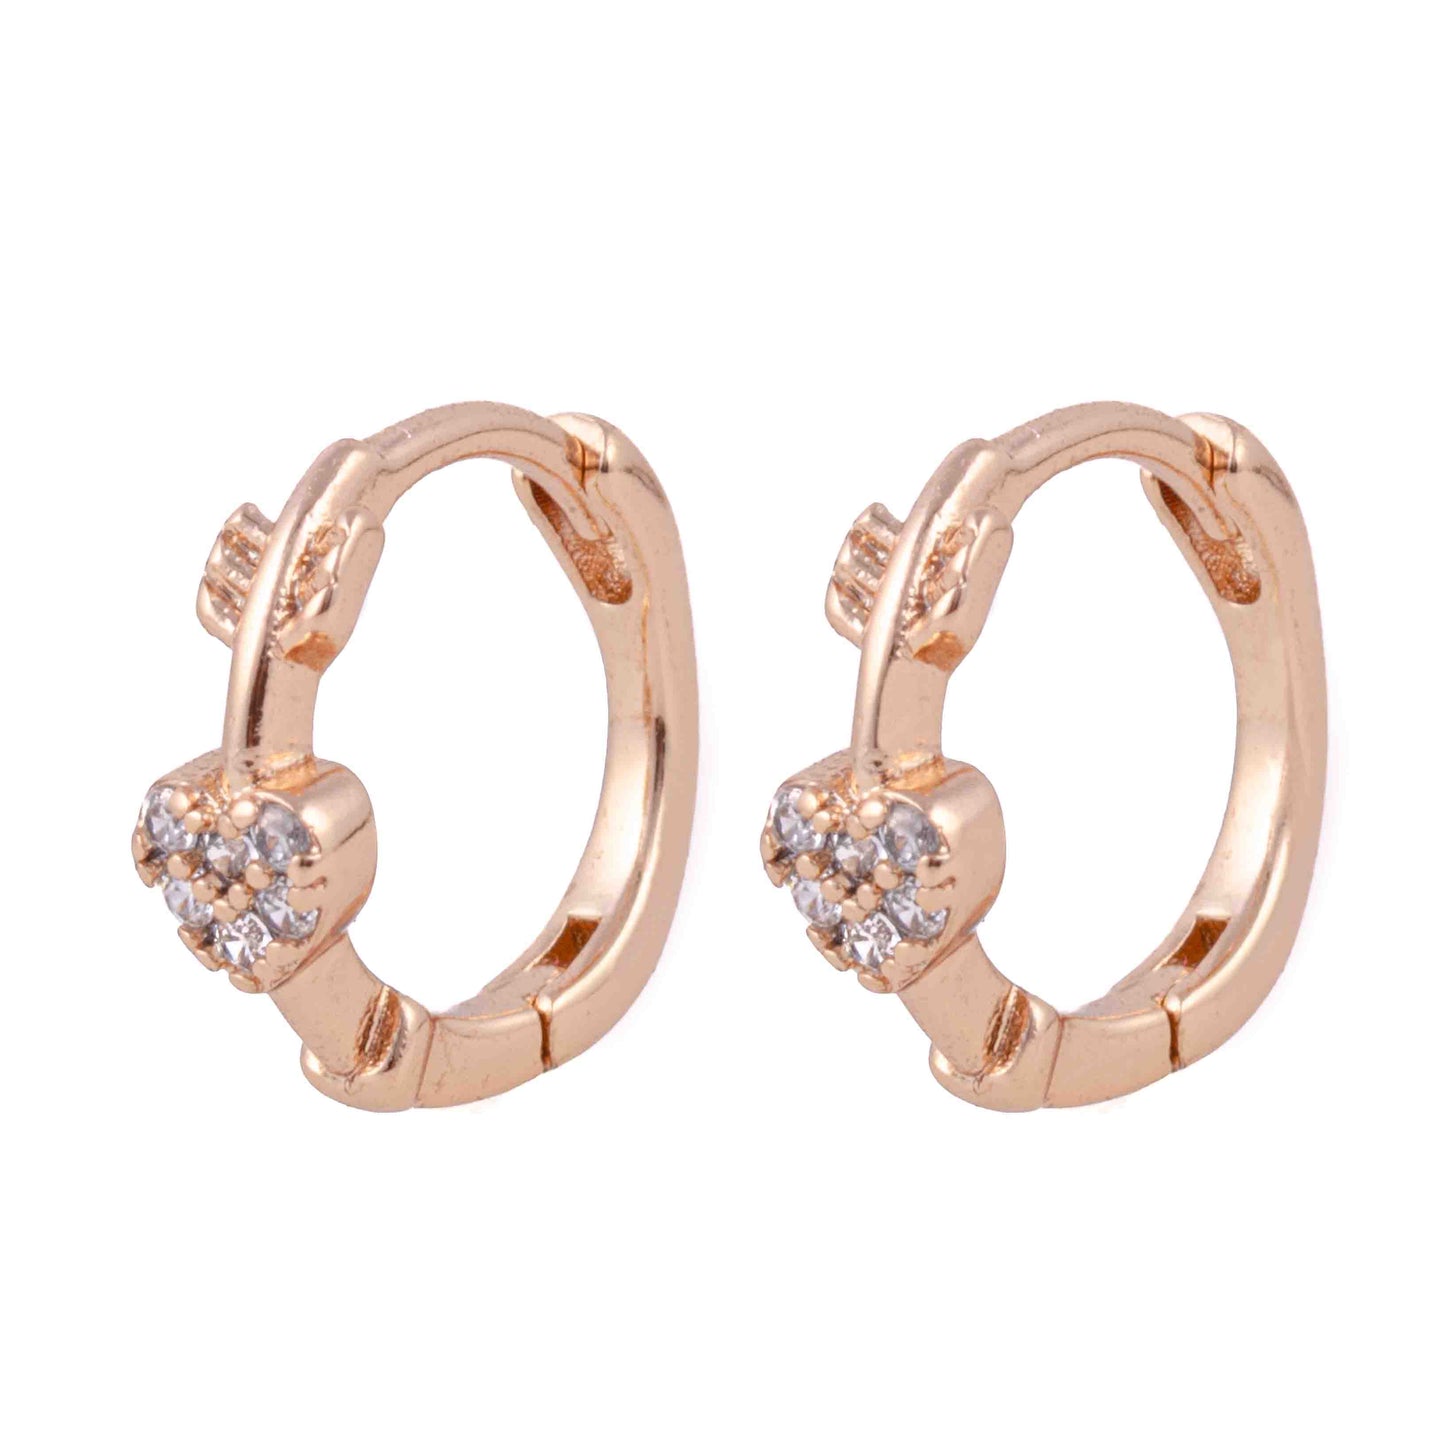 Vallerie 18k Gold Plated Accessory Set